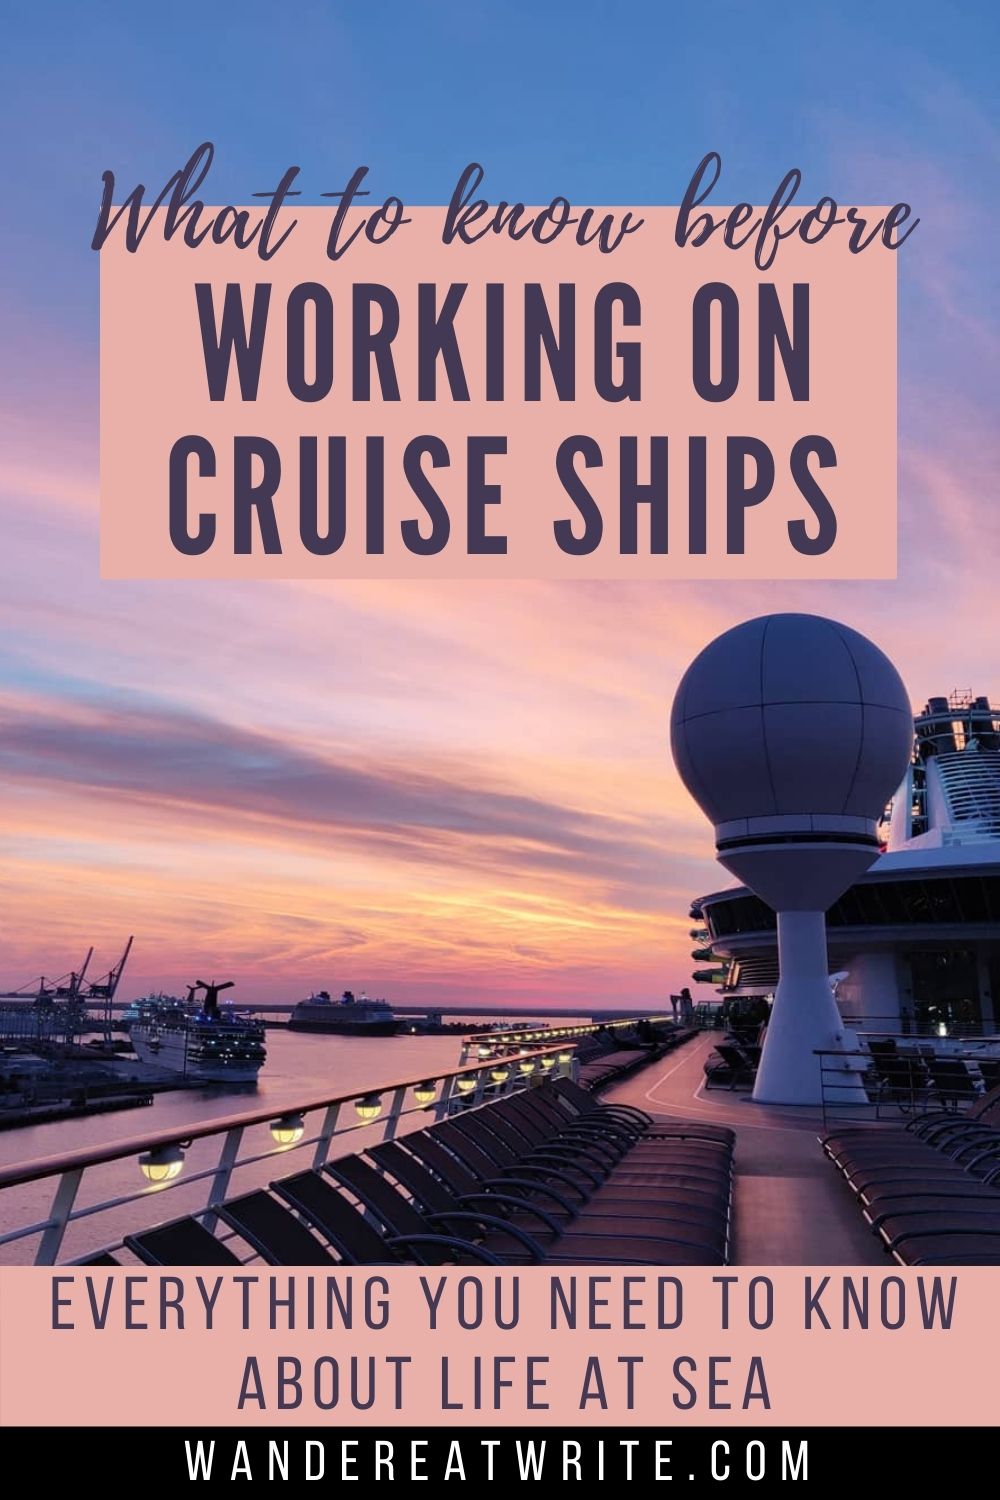 What to know before working on cruise ships: everything you need to know about life at sea; background photo: pink and yellow sunset from top open deck of cruise ship while docked in port